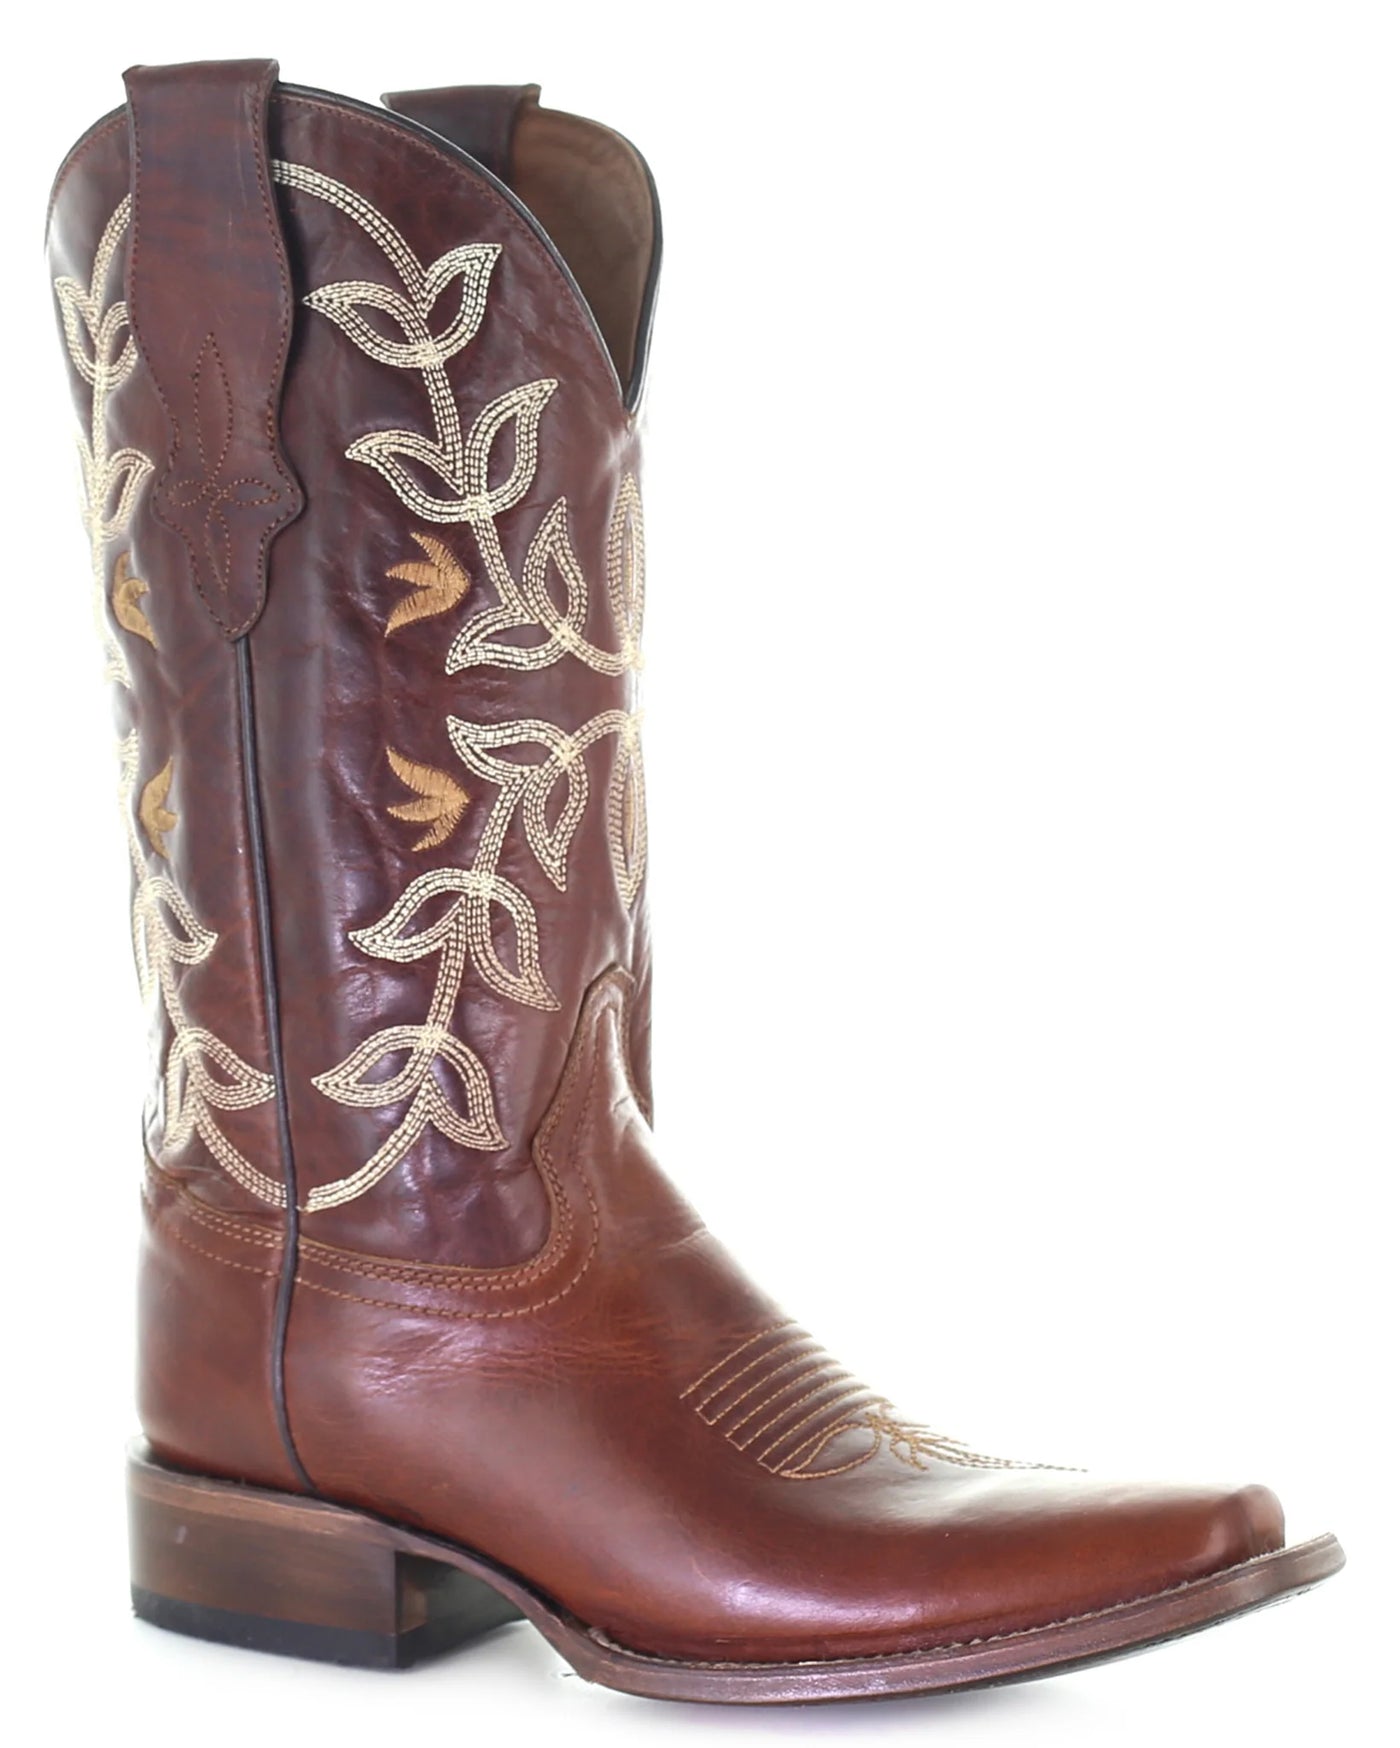 Circle G Women's Floral Embroidery Boot-CLEARANCE-NO RETURNS